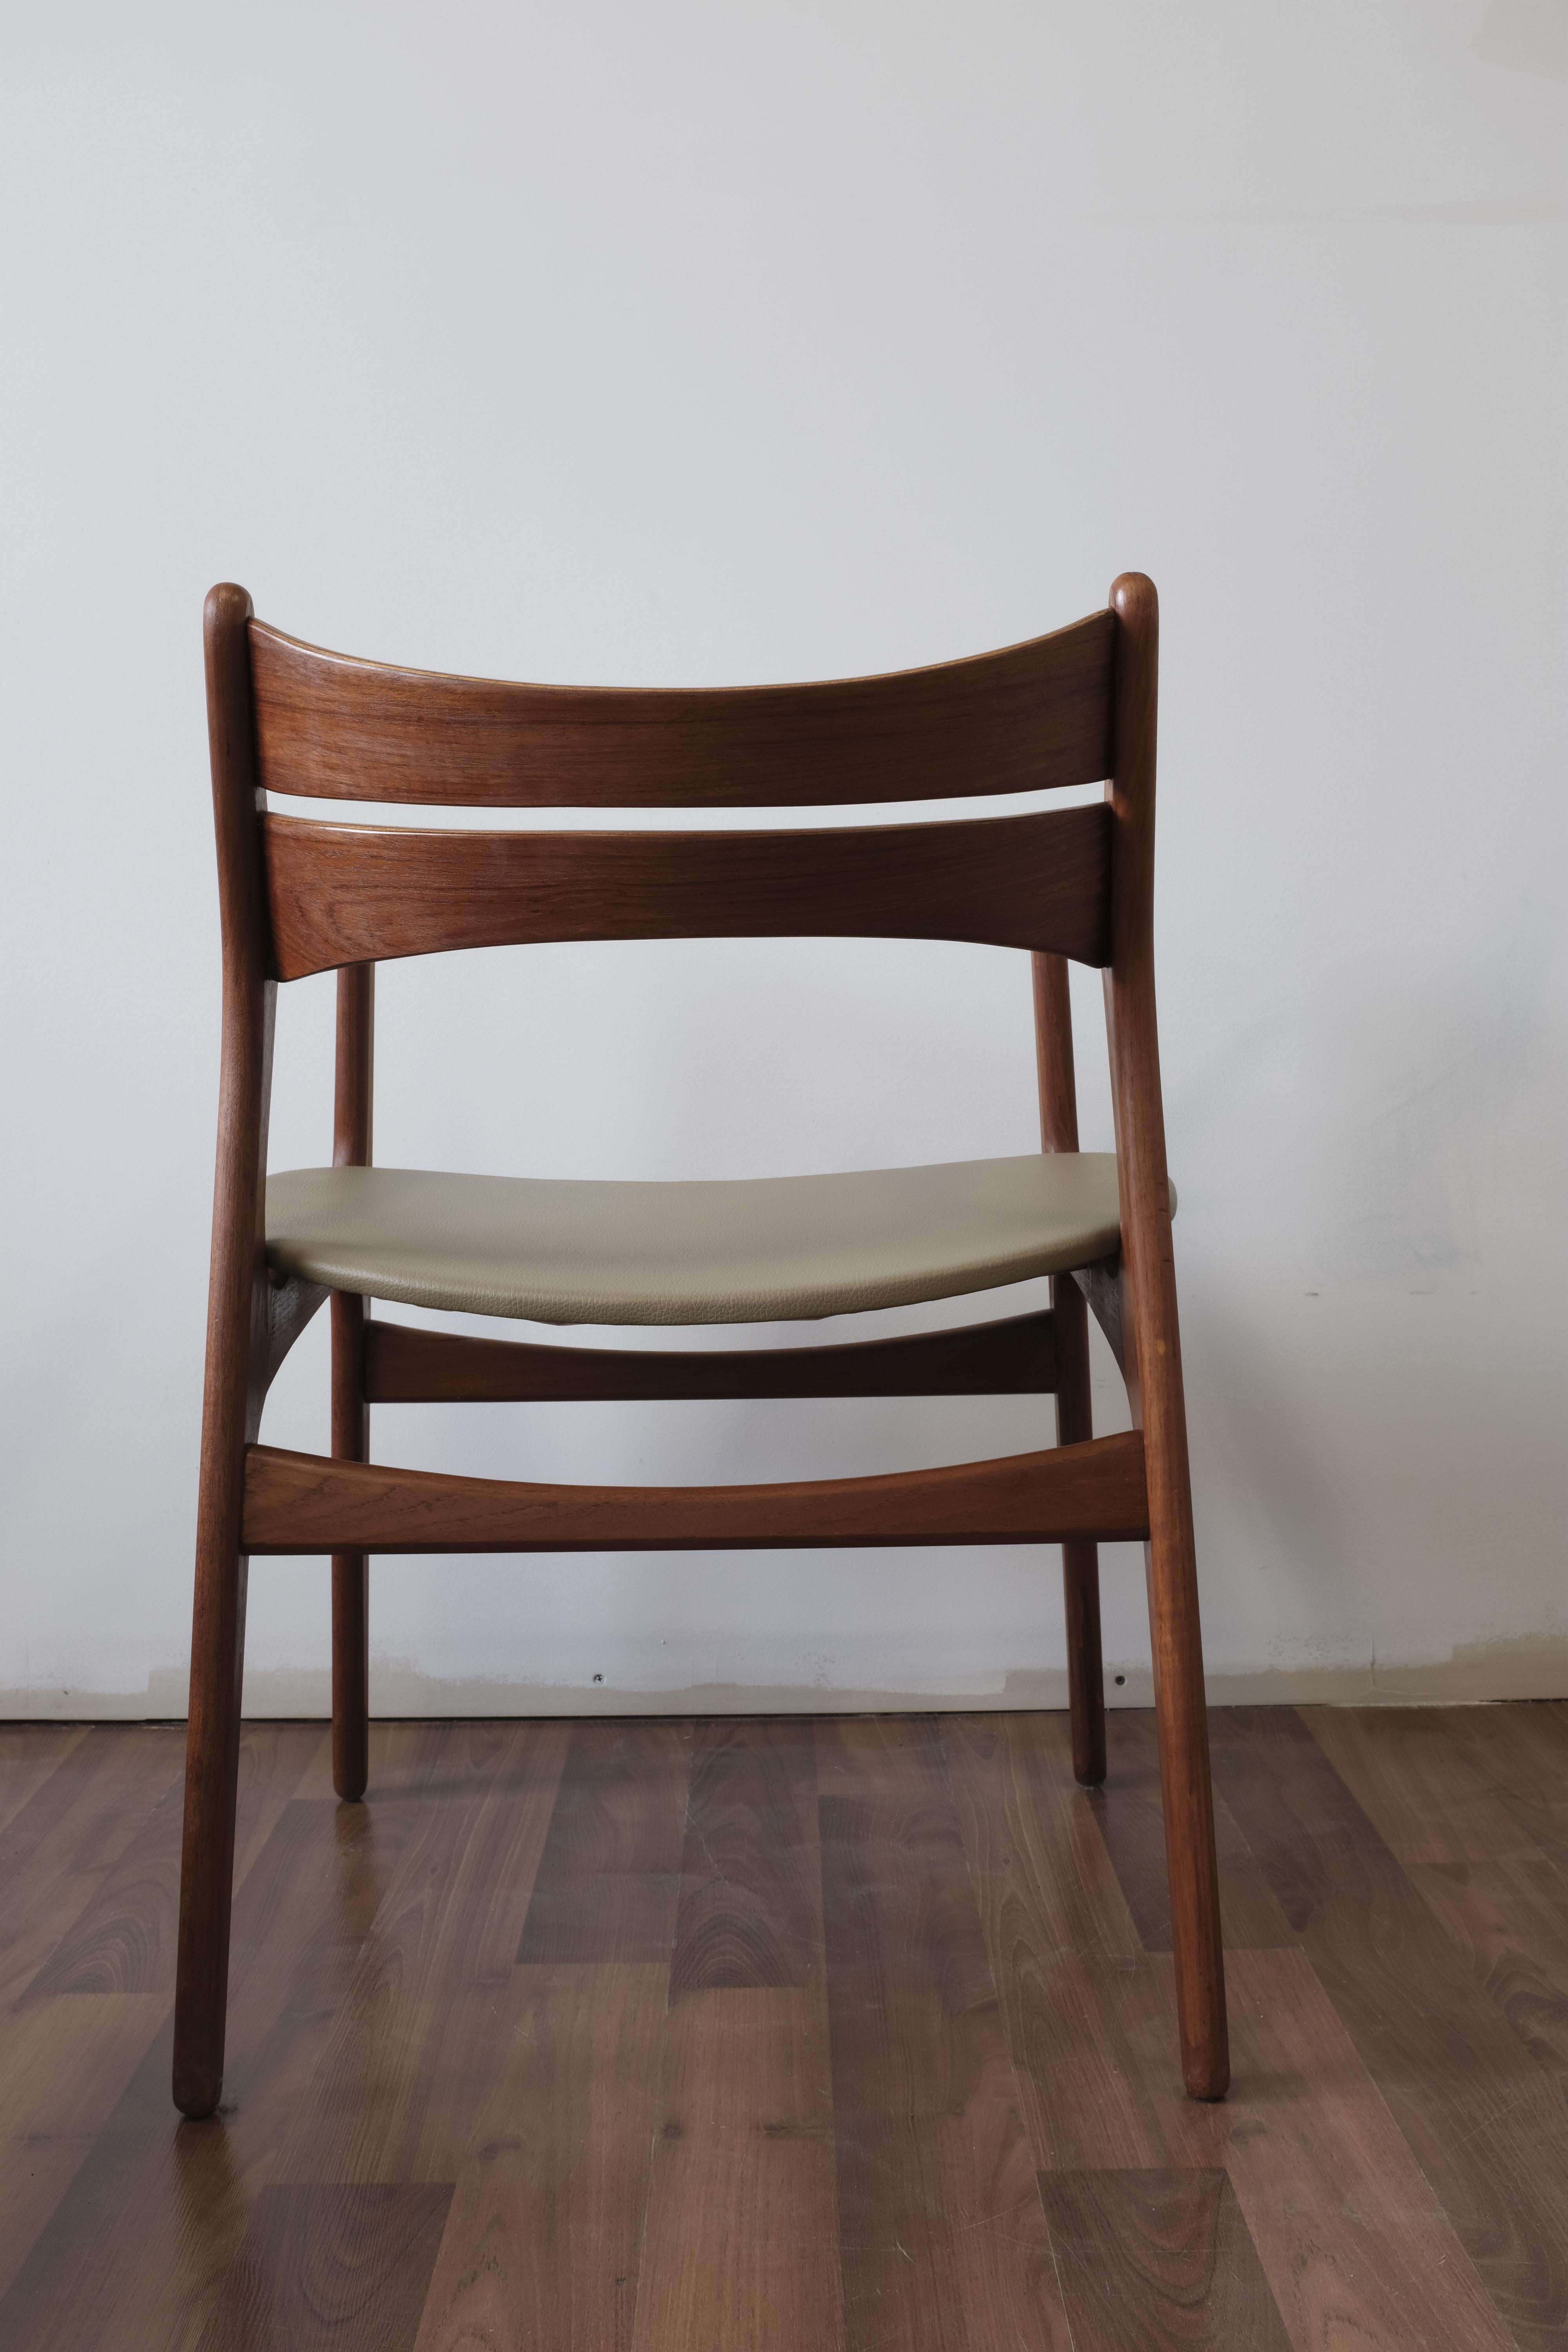 Set of 2 model 310 armchairs designed by Erik Buch and made in Denmark by Christiansen Møbelfabrik.

Frames constructed in solid teak with bent-laminated teak backrests and seats upholstered in a green-beige pebbled leatherette.

4 side chairs